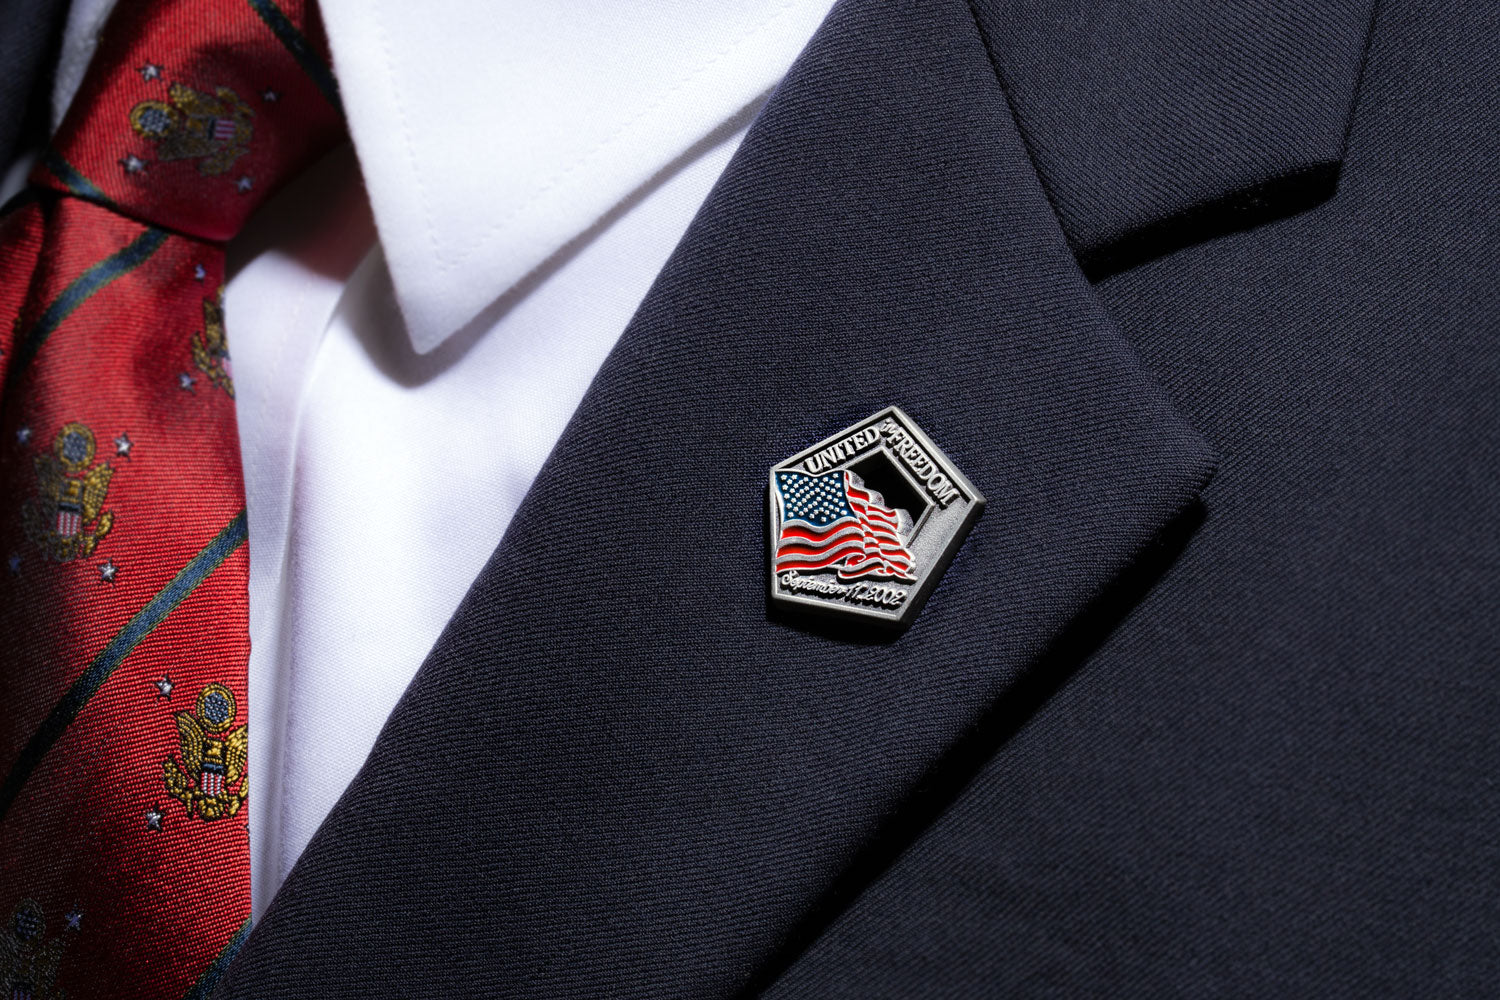 A US flag lapel pin attached to a lapel of a suit